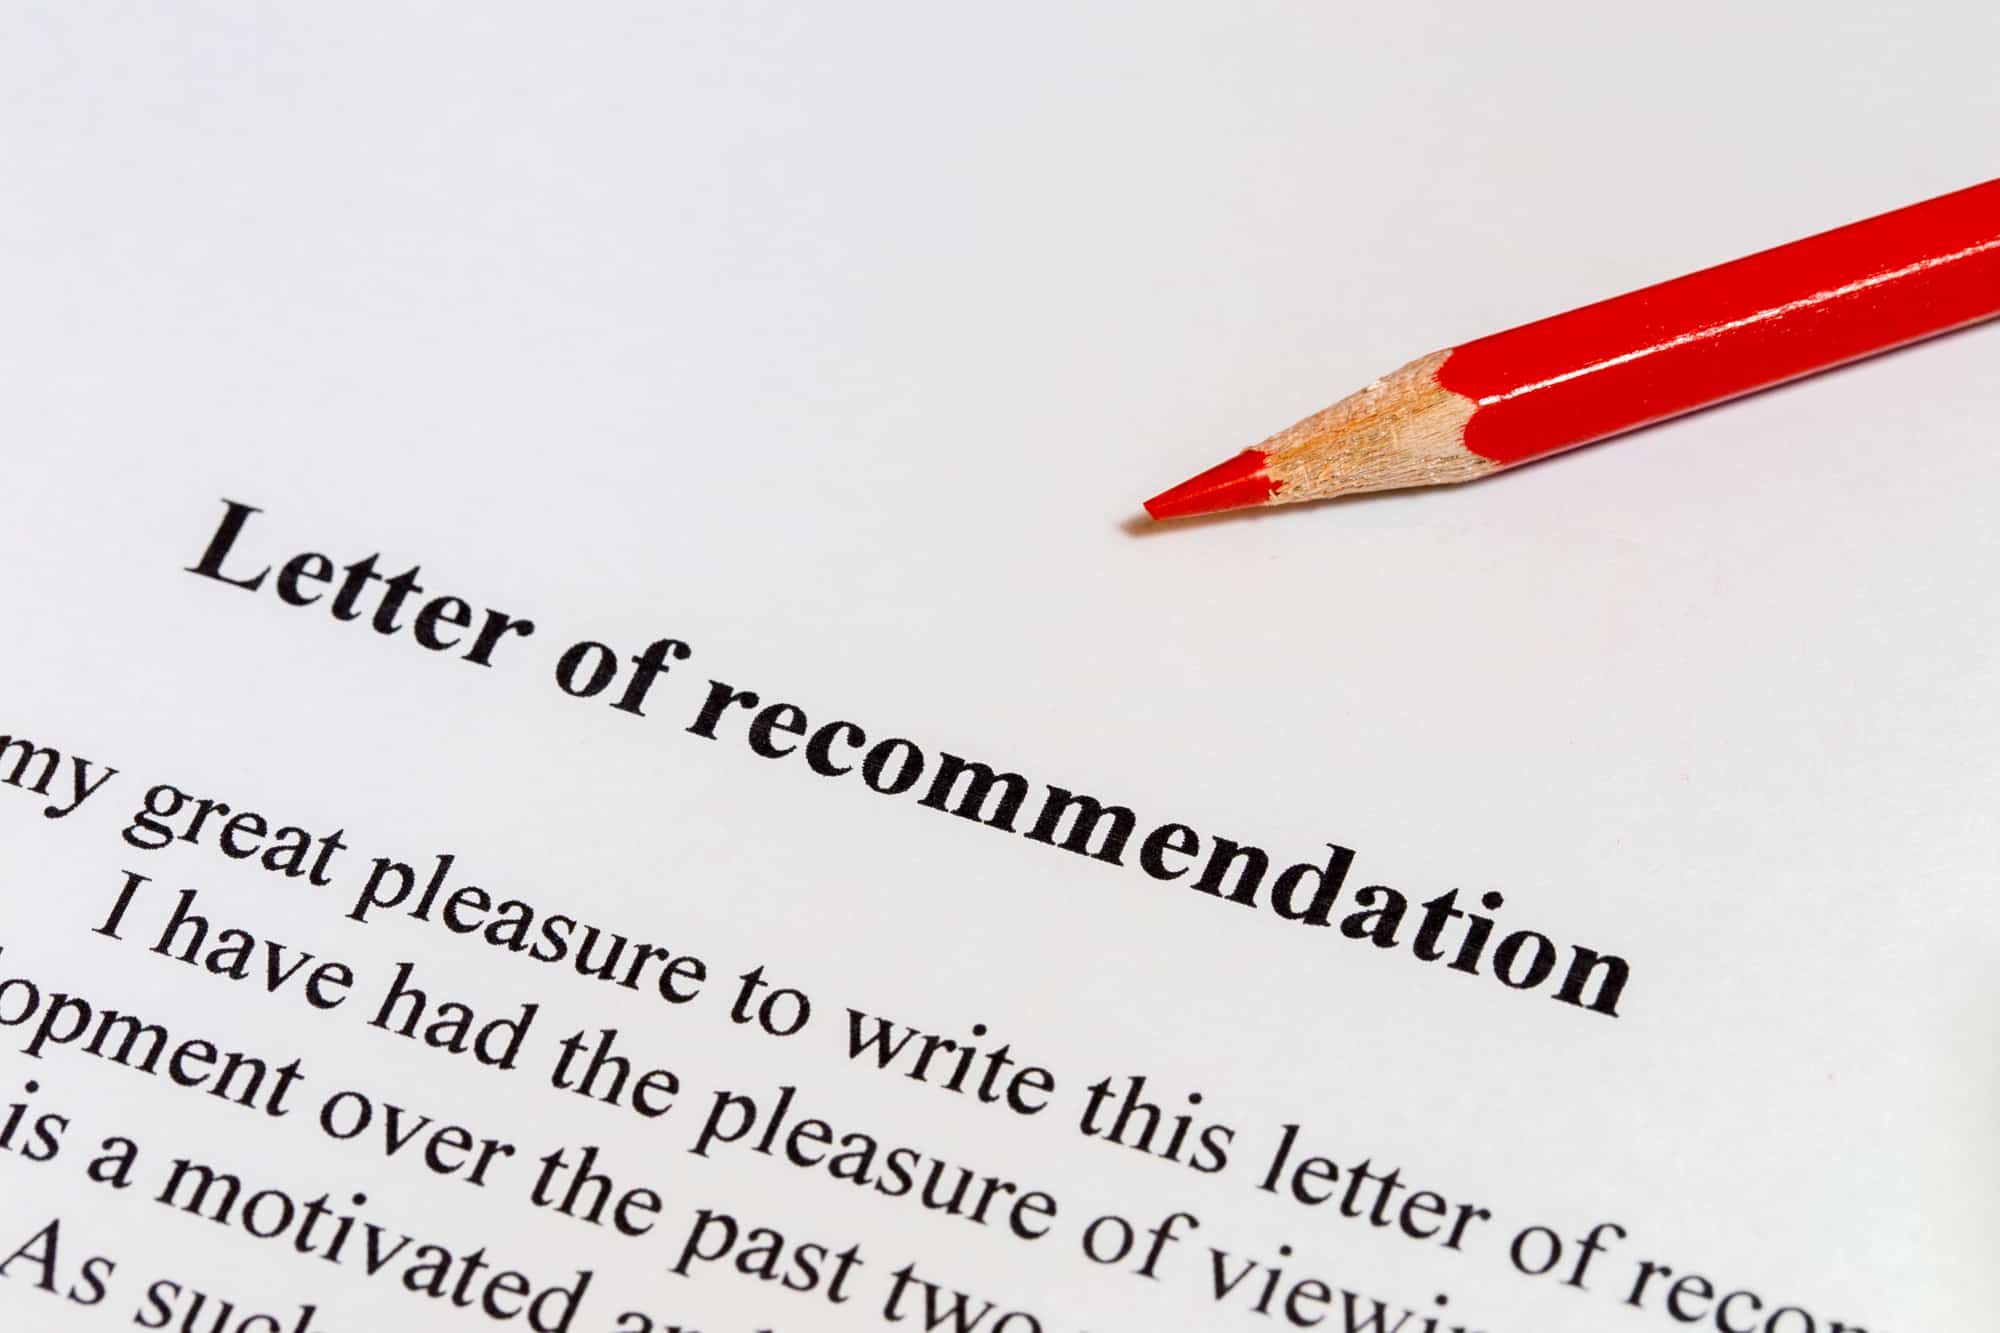 Letter of recommendation and a red pencil